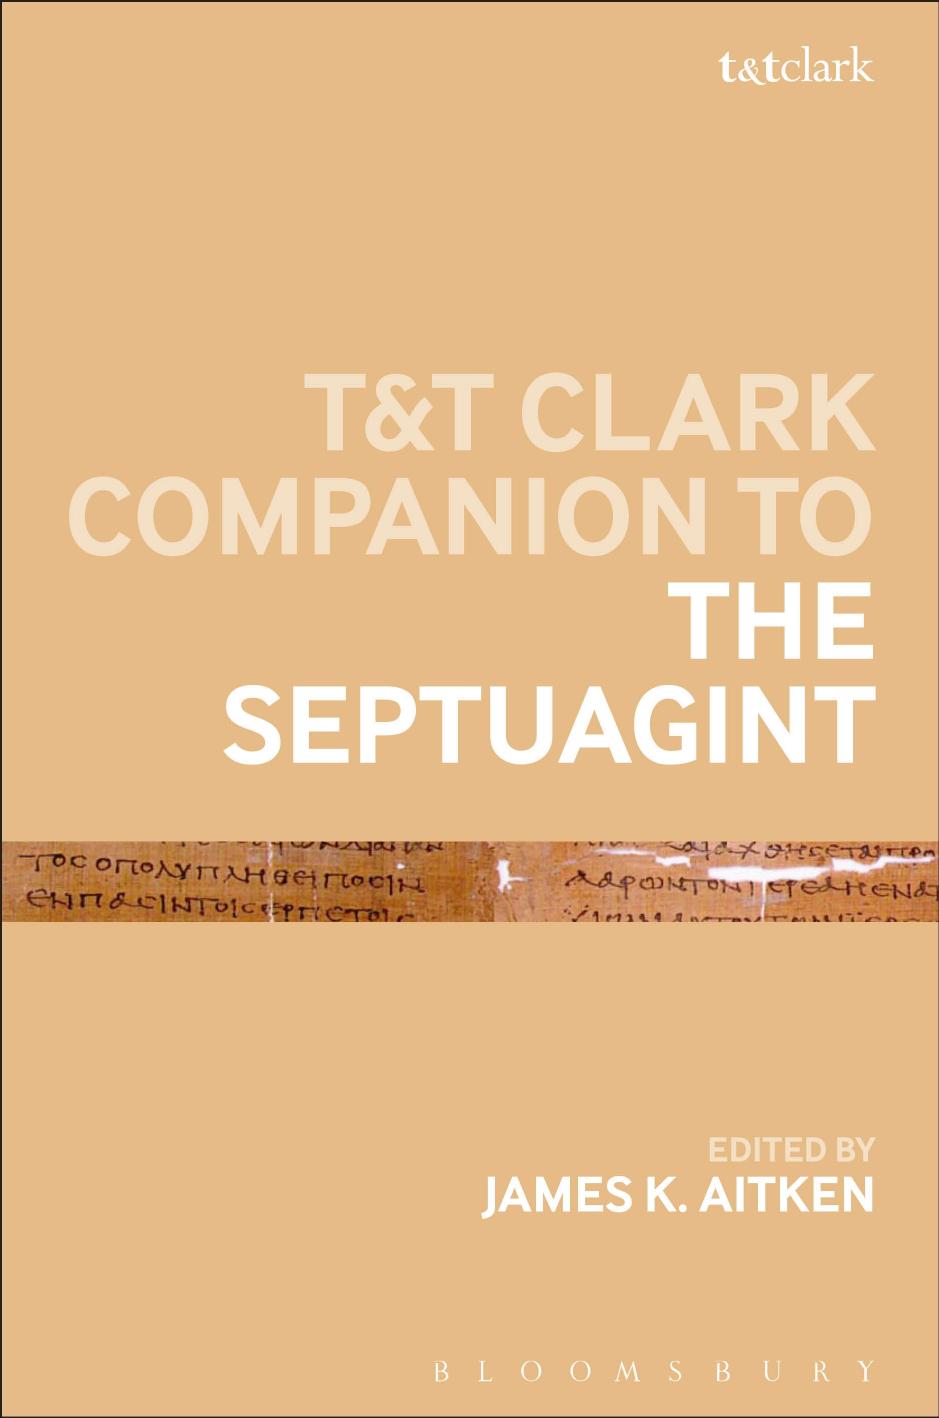 The T&T Clark Companion to the Septuagint by James K. Aitken (editor)